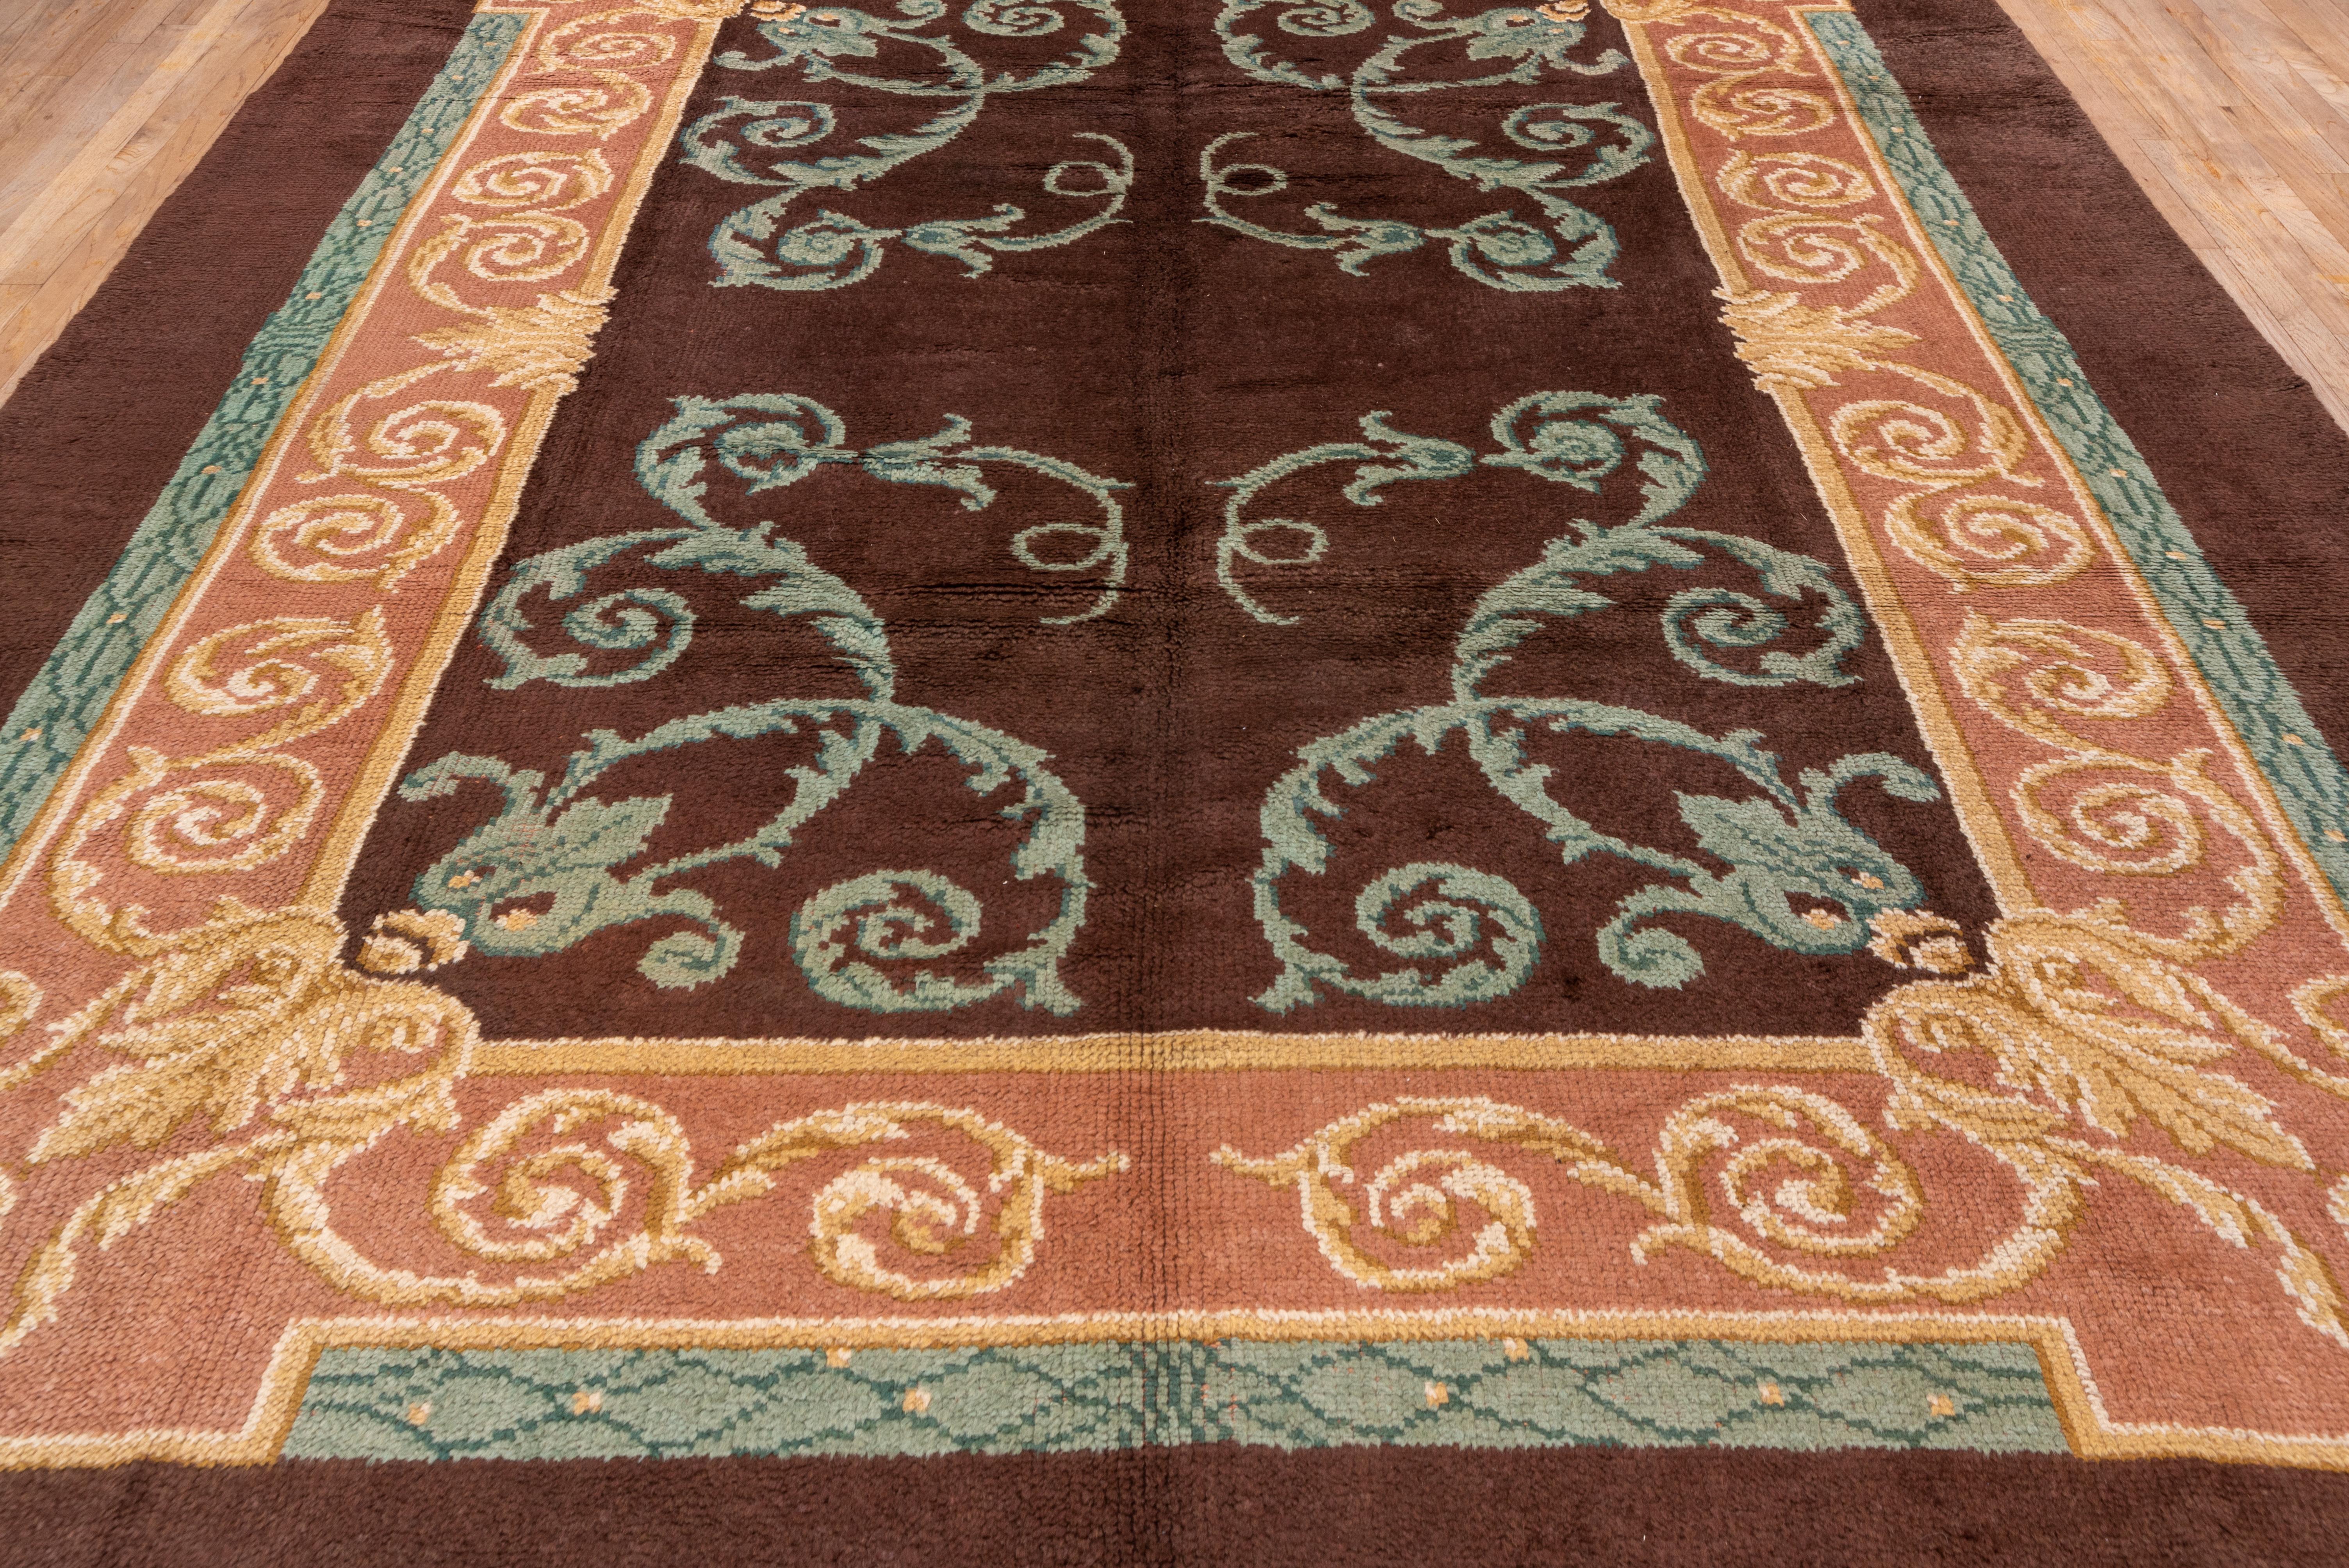 This coarsely knotted carpet with glossy wool has a simple large spiral acanthus design in teal n the warm brown ground. The main salmon-brown border shows more acanthus volutes, within a wide sienna brown plain outer surround. The style is